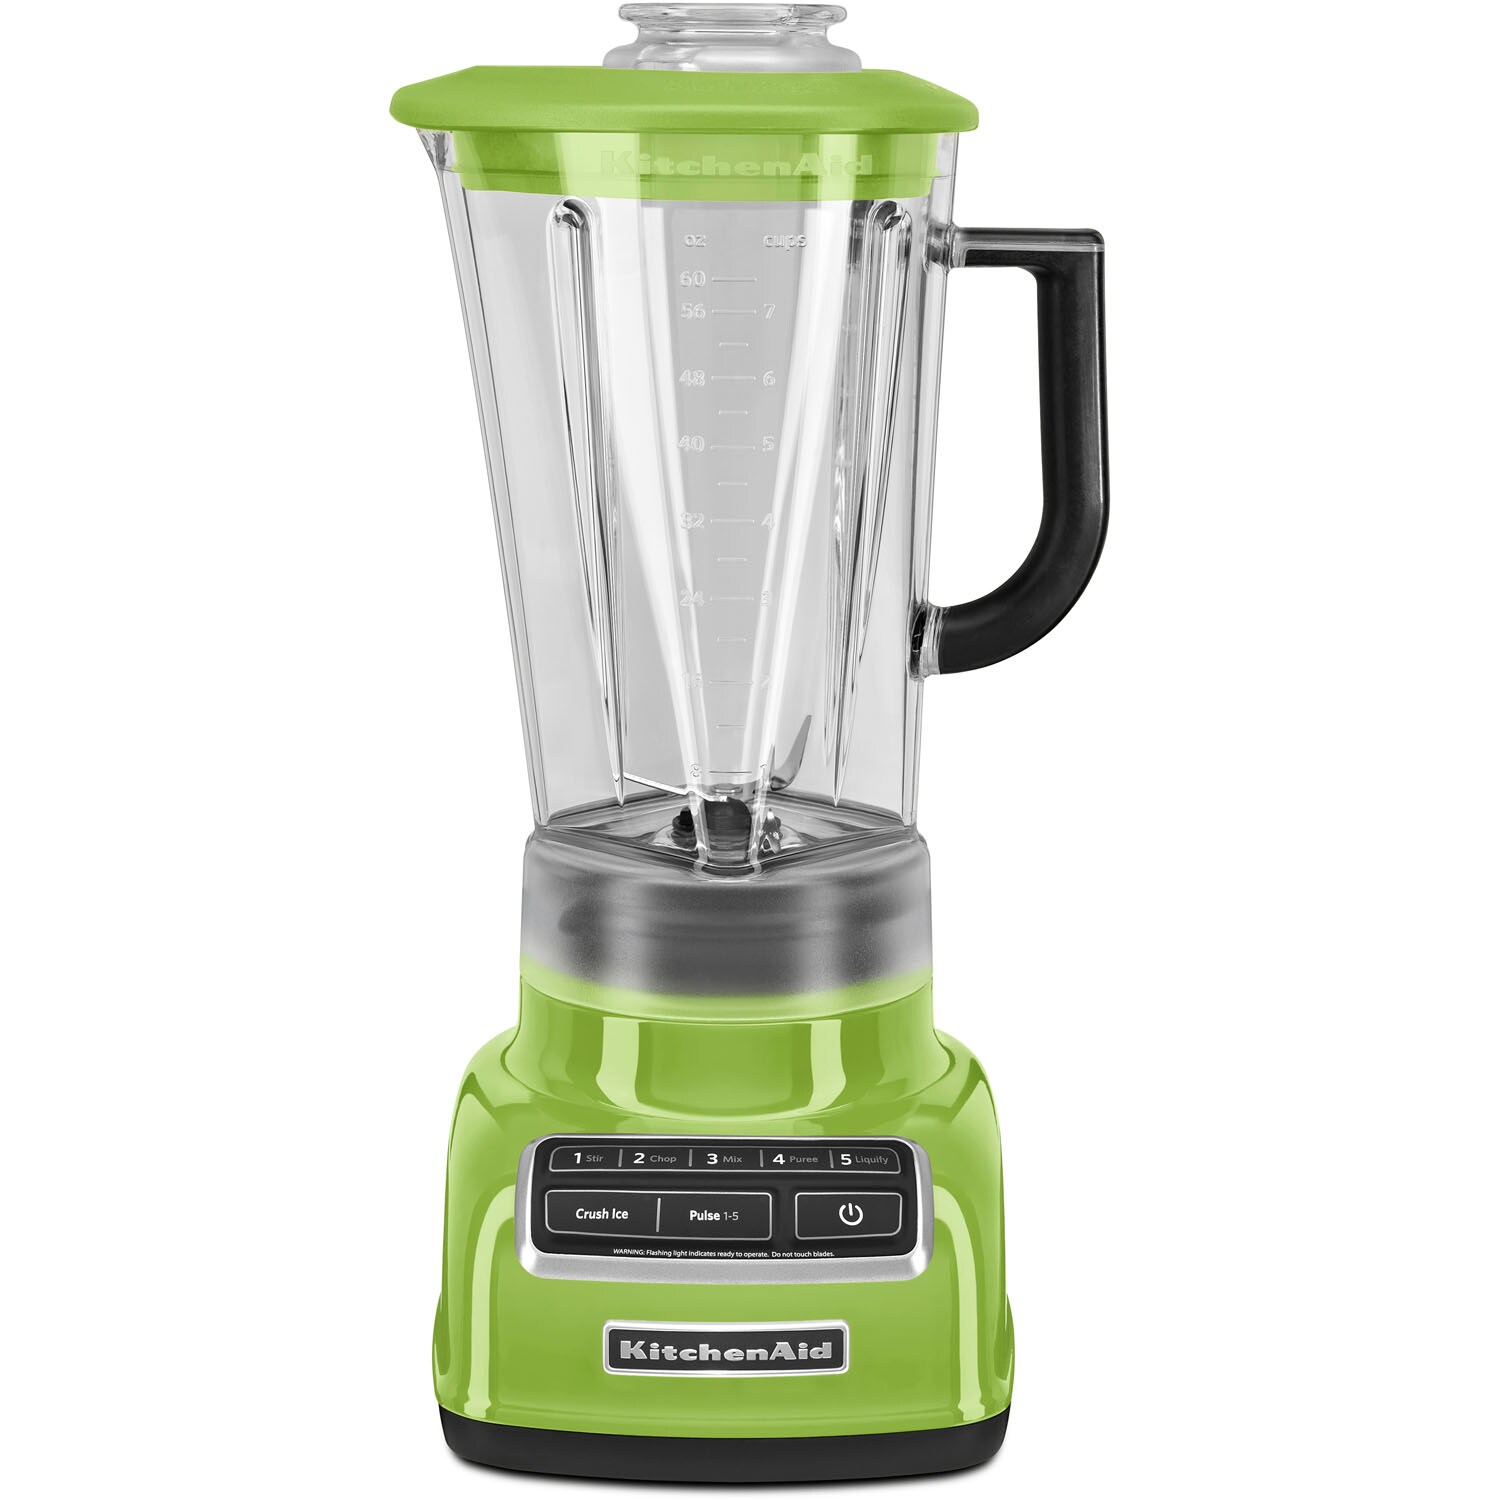 The Ninja Ultima Blender {Review} + Green Monster Smoothie and